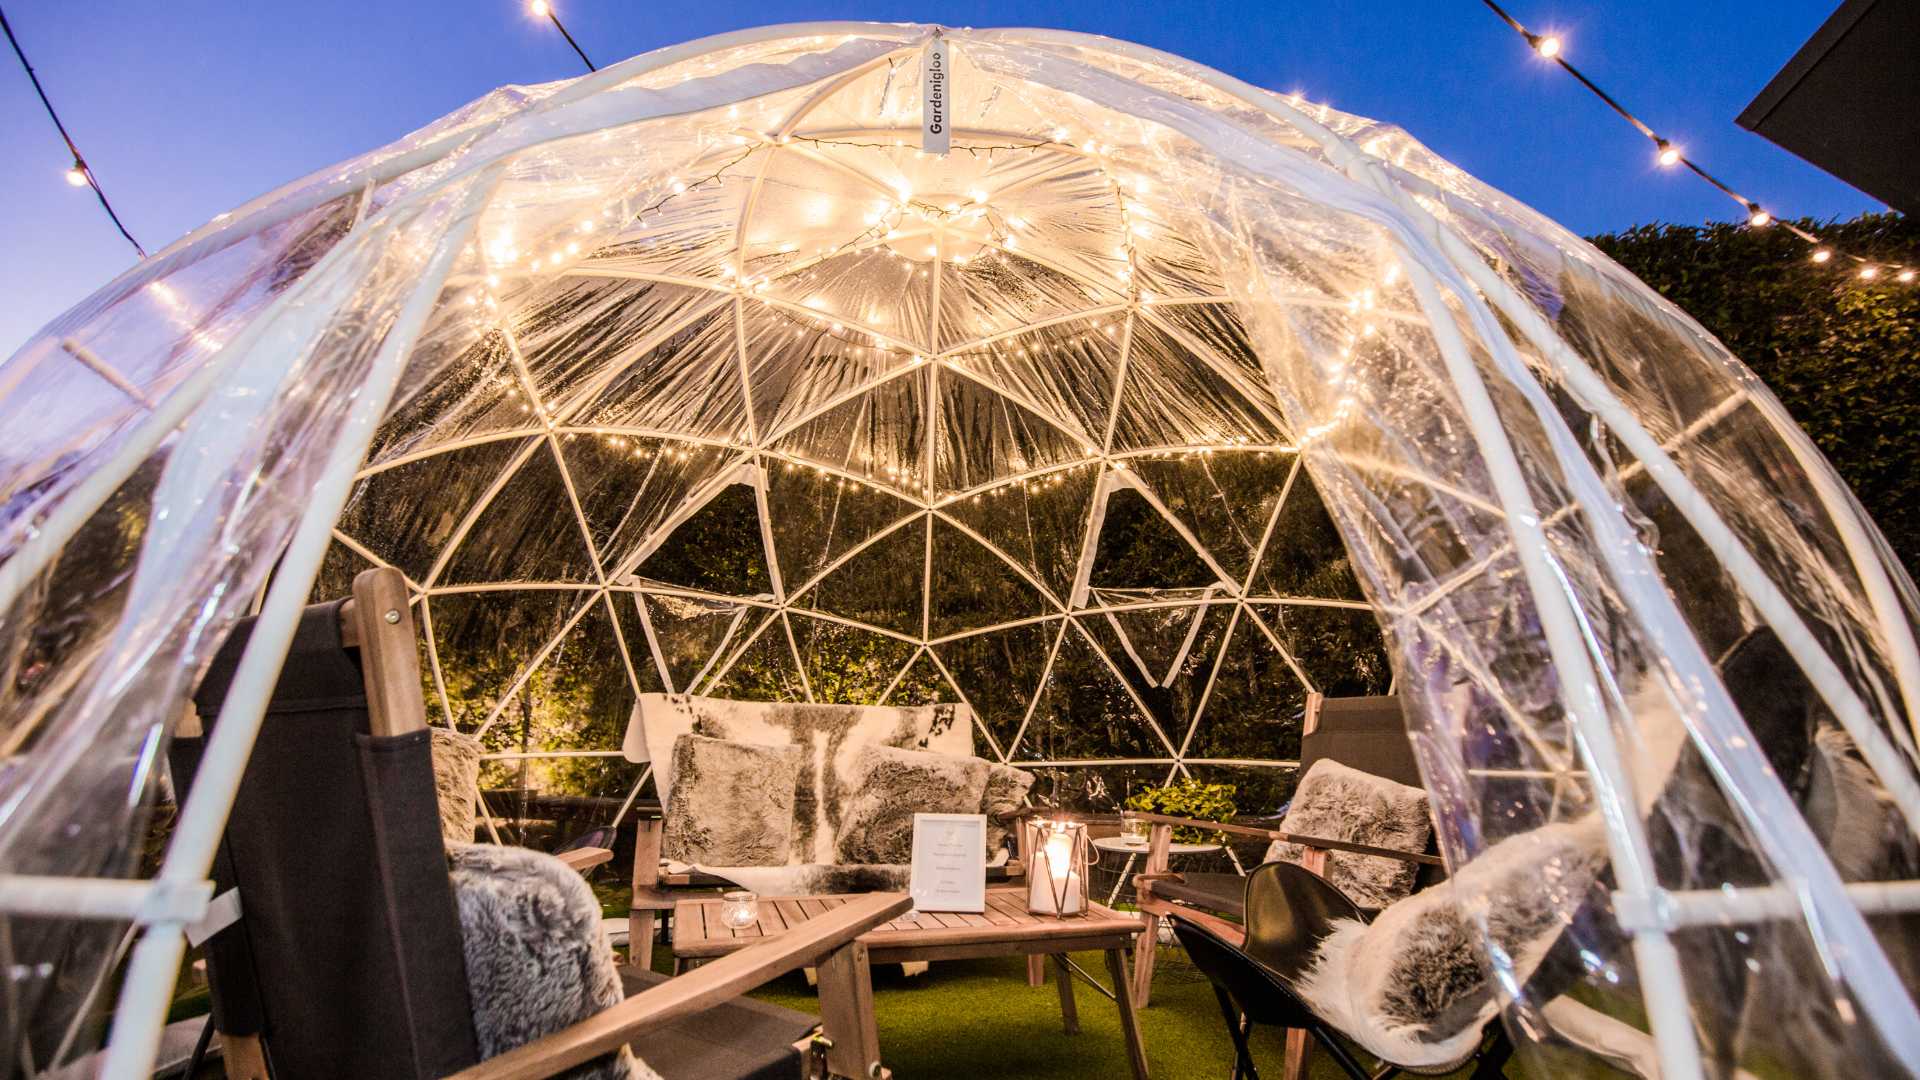 Winter Igloo Gardens Are Popping Up at Four More Pubs Across Queensland